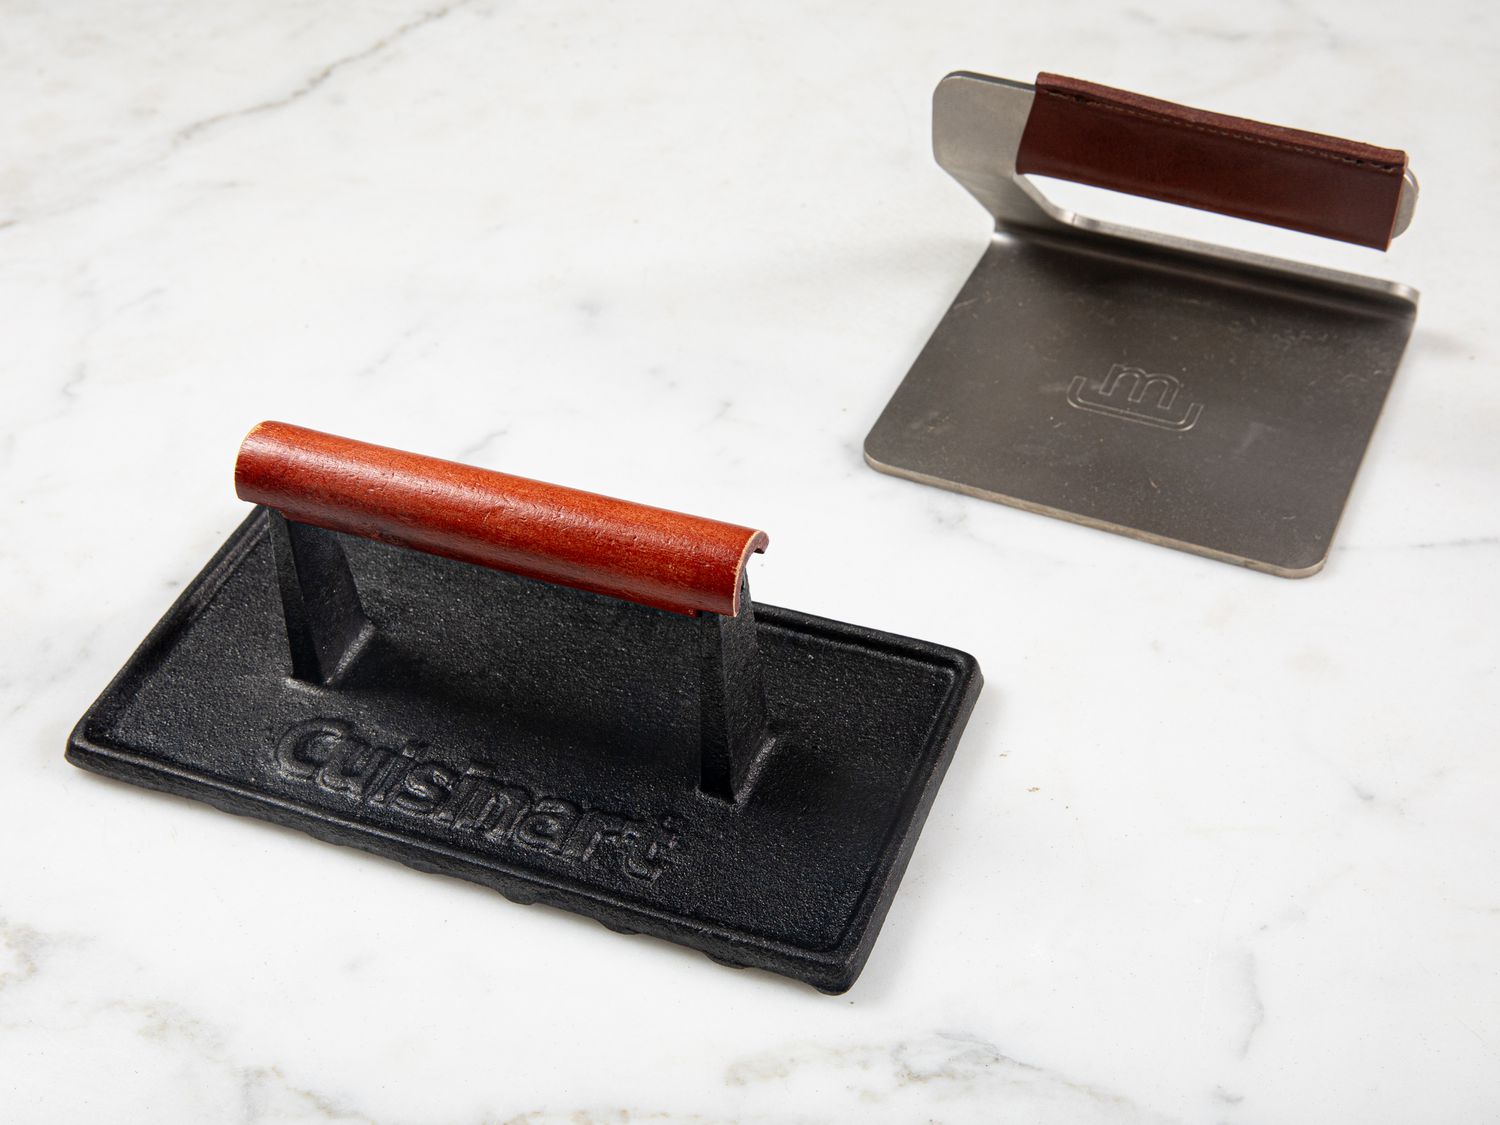 Made In and Cuisinart Grill presses on a marble surface